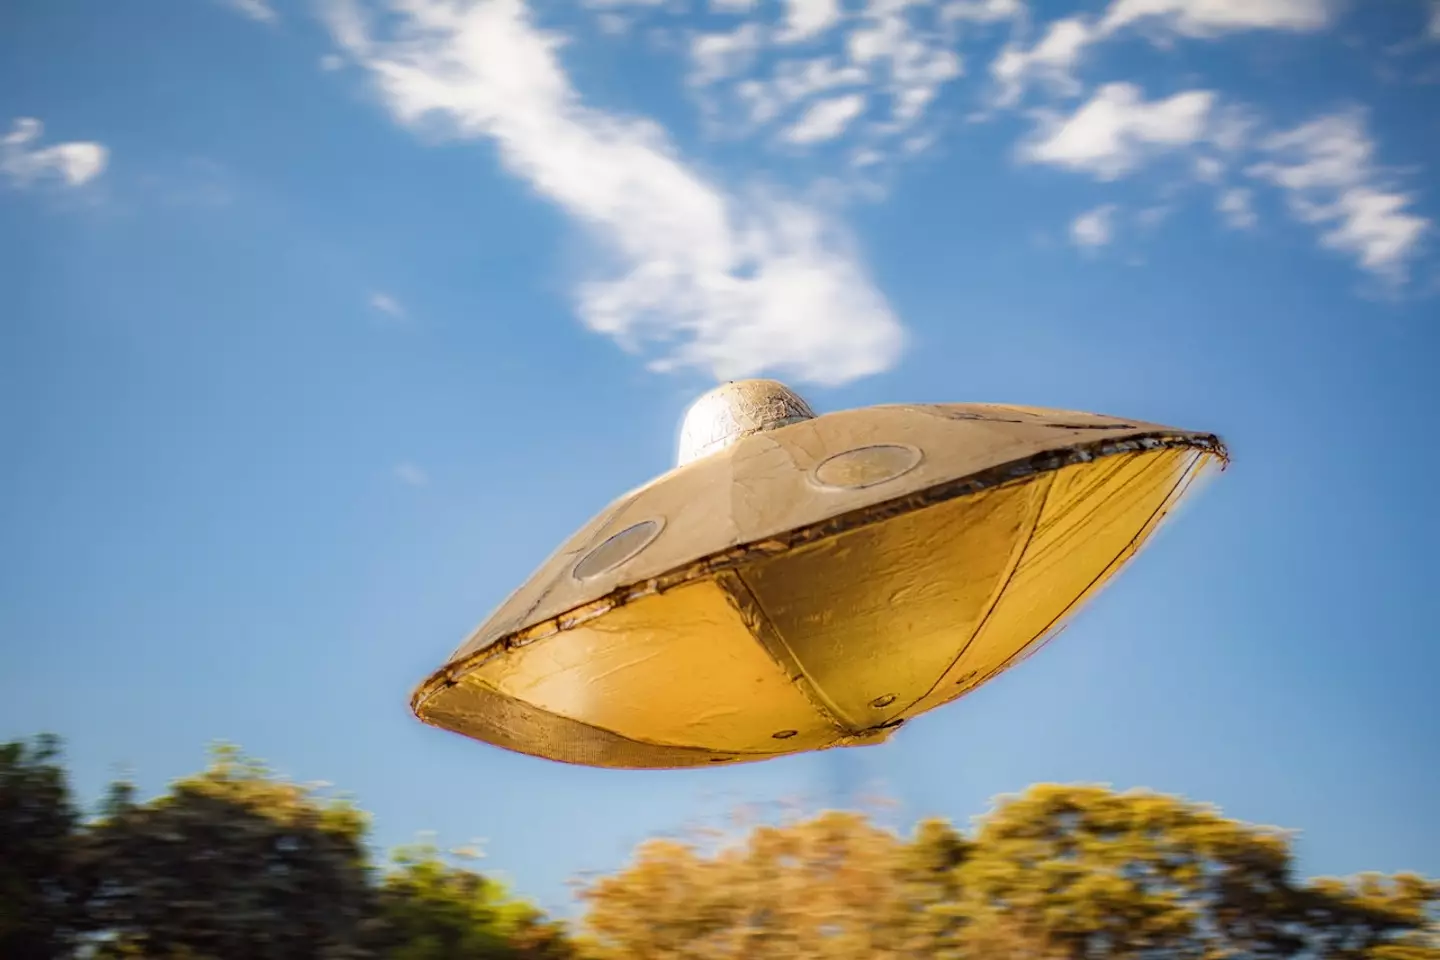 Experts have drafted a paper that explores the possibility of an alien mothership hovering around the solar system, sending out tiny probes to explore planets.